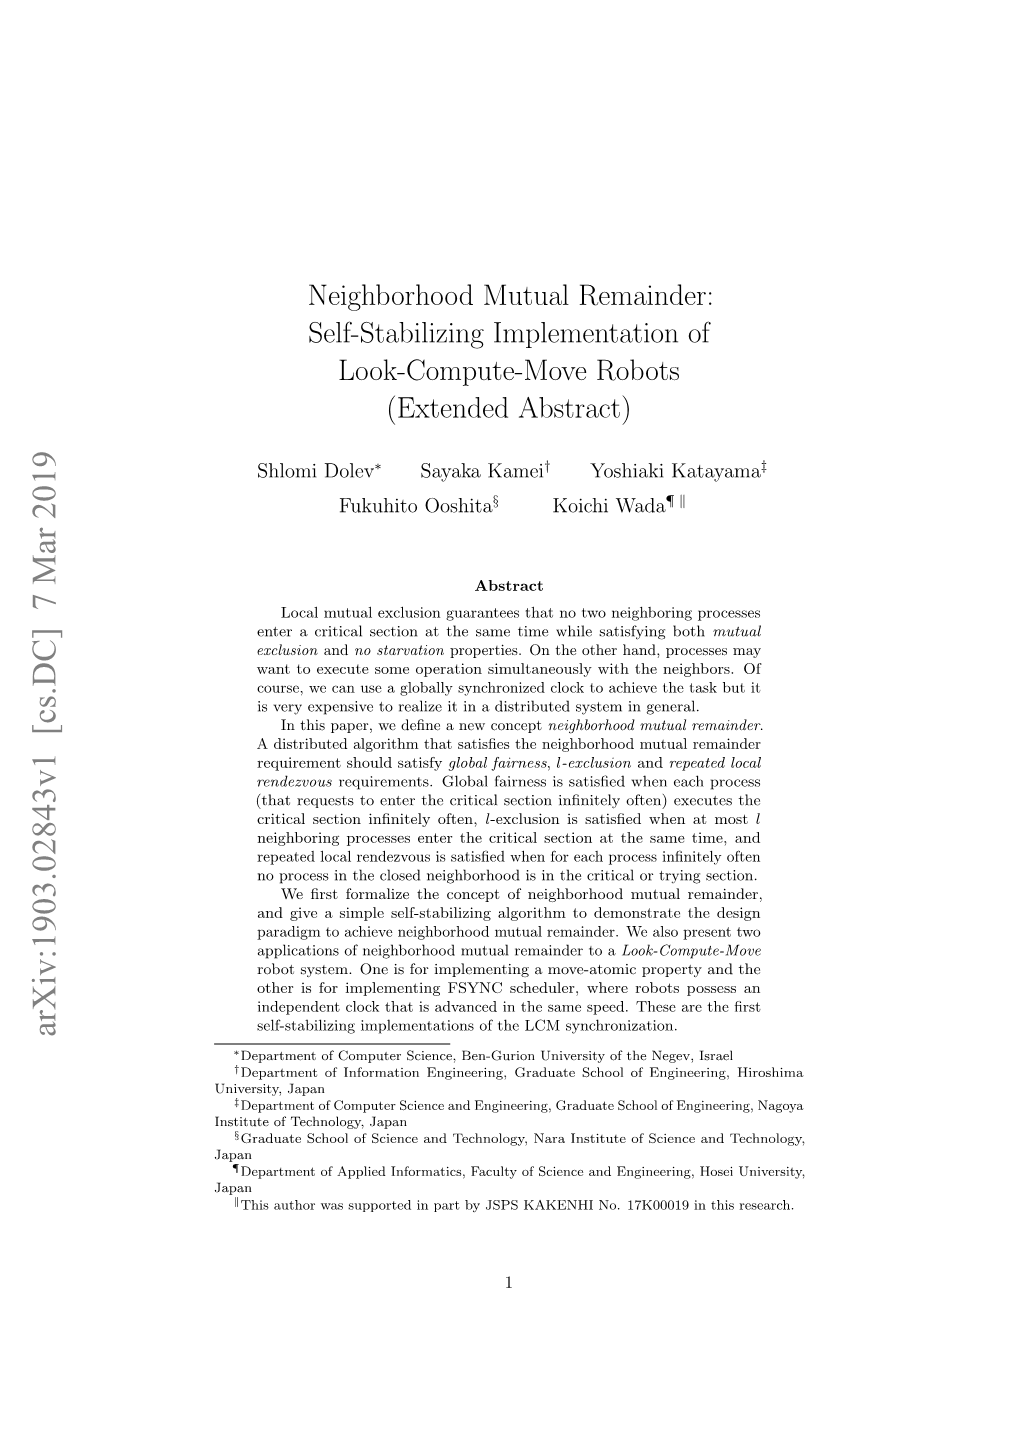 Neighborhood Mutual Remainder: Self-Stabilizing Implementation of Look-Compute-Move Robots (Extended Abstract)